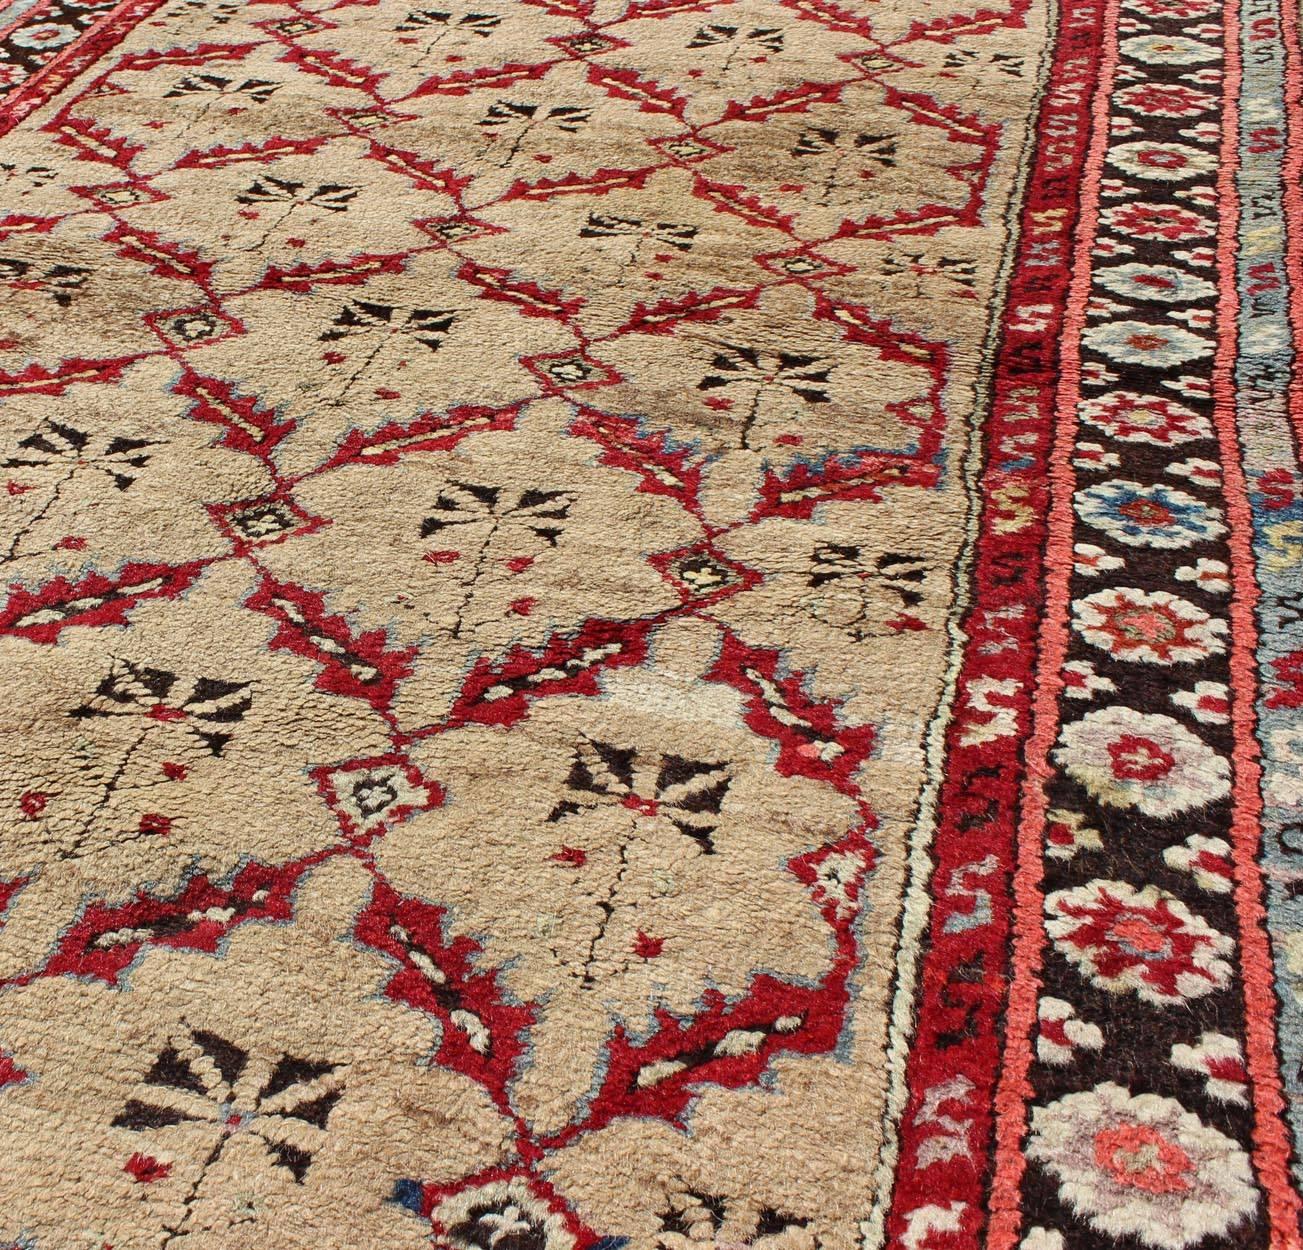 Antique 1930's Turkish Oushak Rug with All-Over Lattice & Geometric Design In Good Condition For Sale In Atlanta, GA